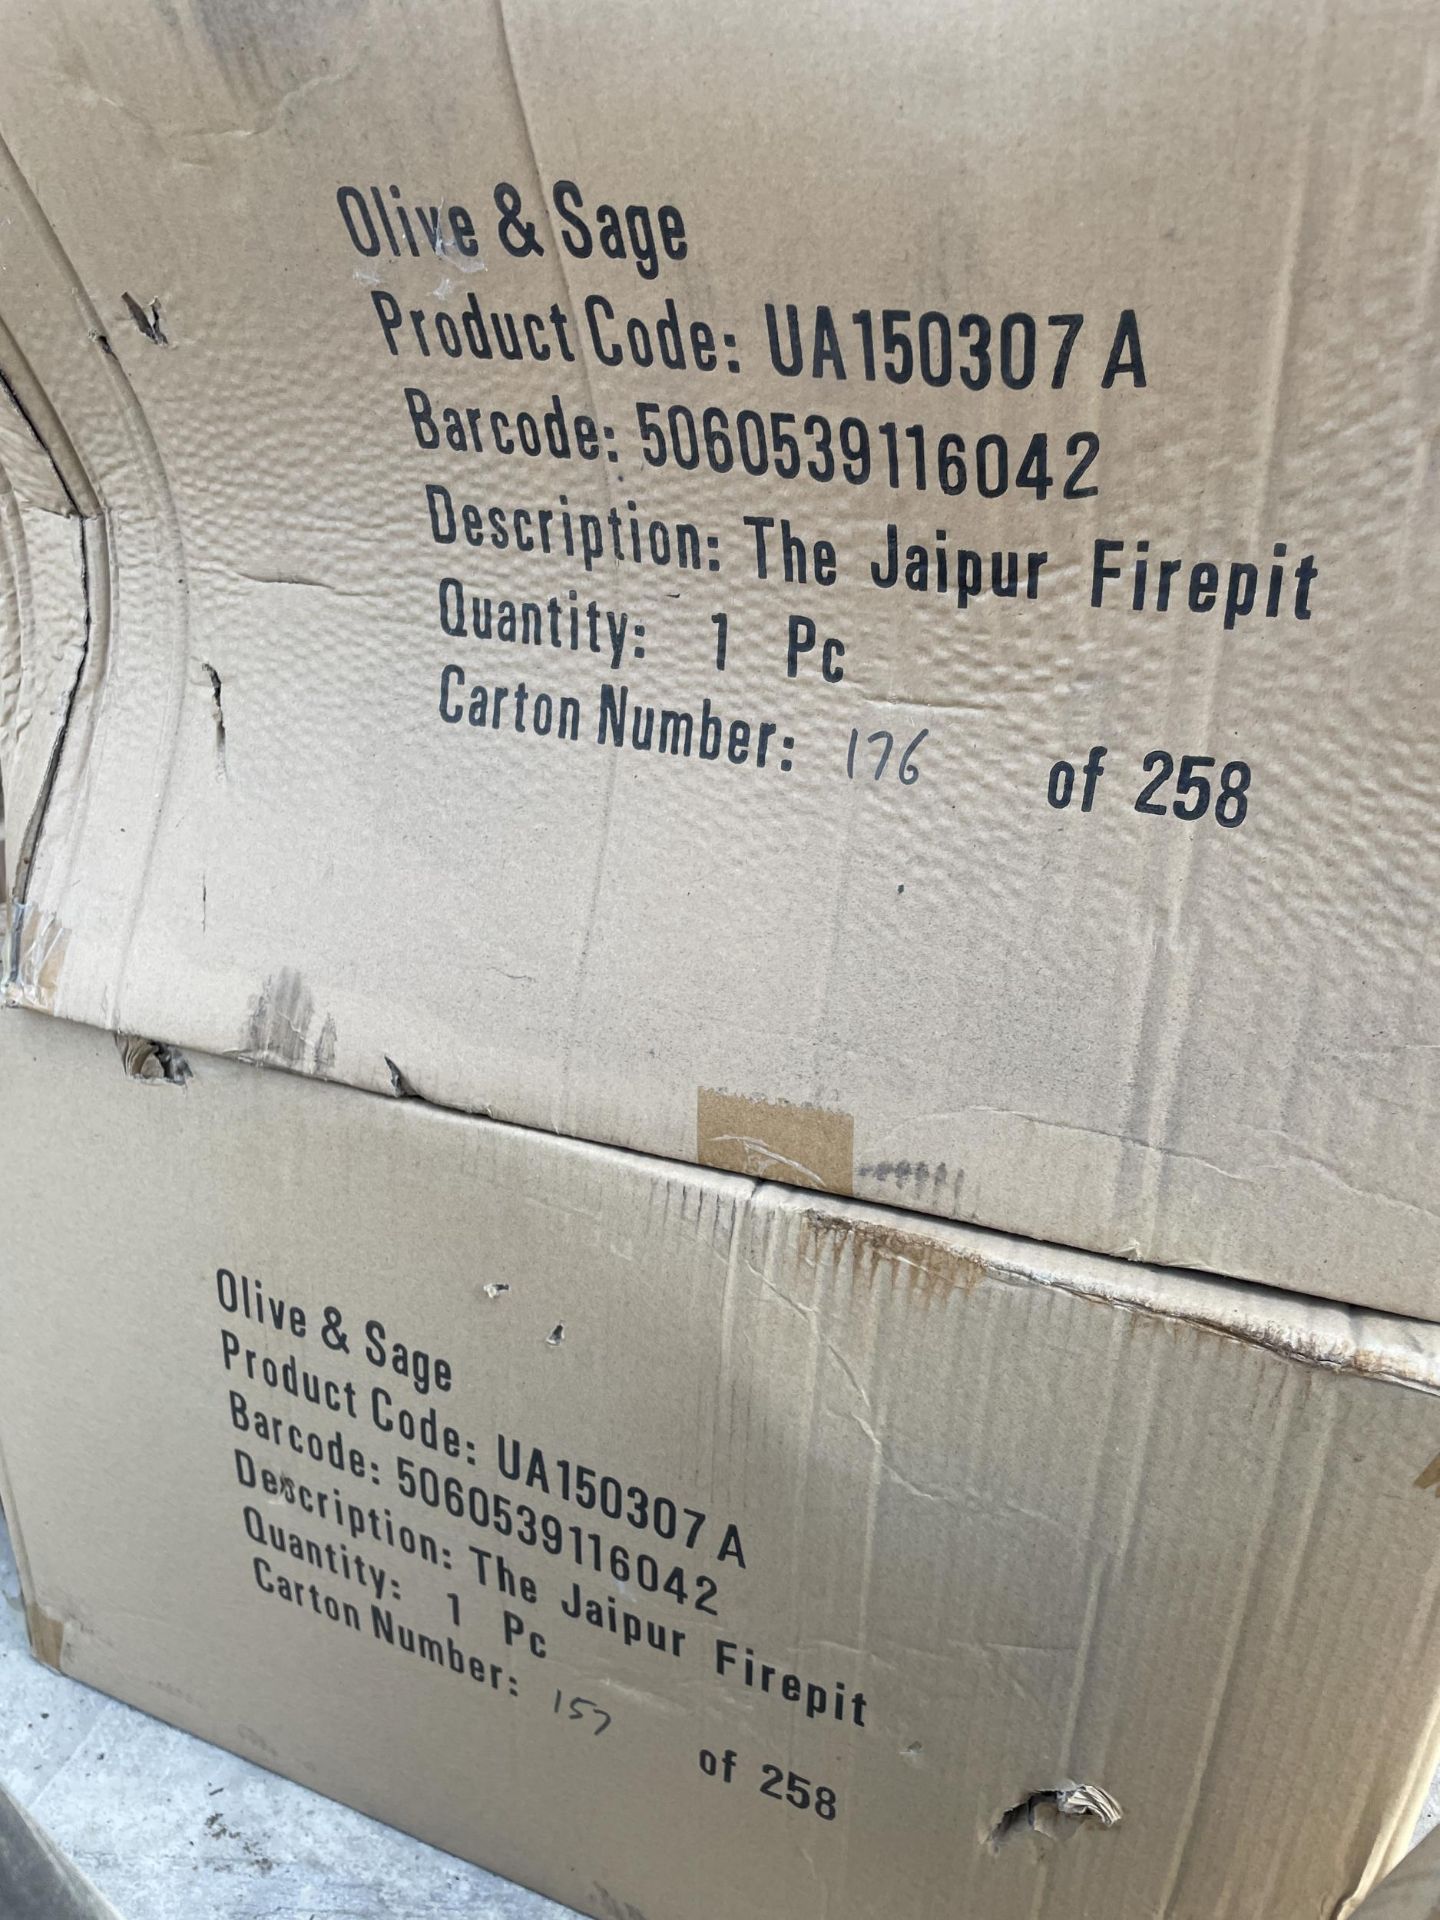 TWO NEW AND BOXED OLIVE AND SAGE JAIPUR FIREPITS - Image 2 of 2